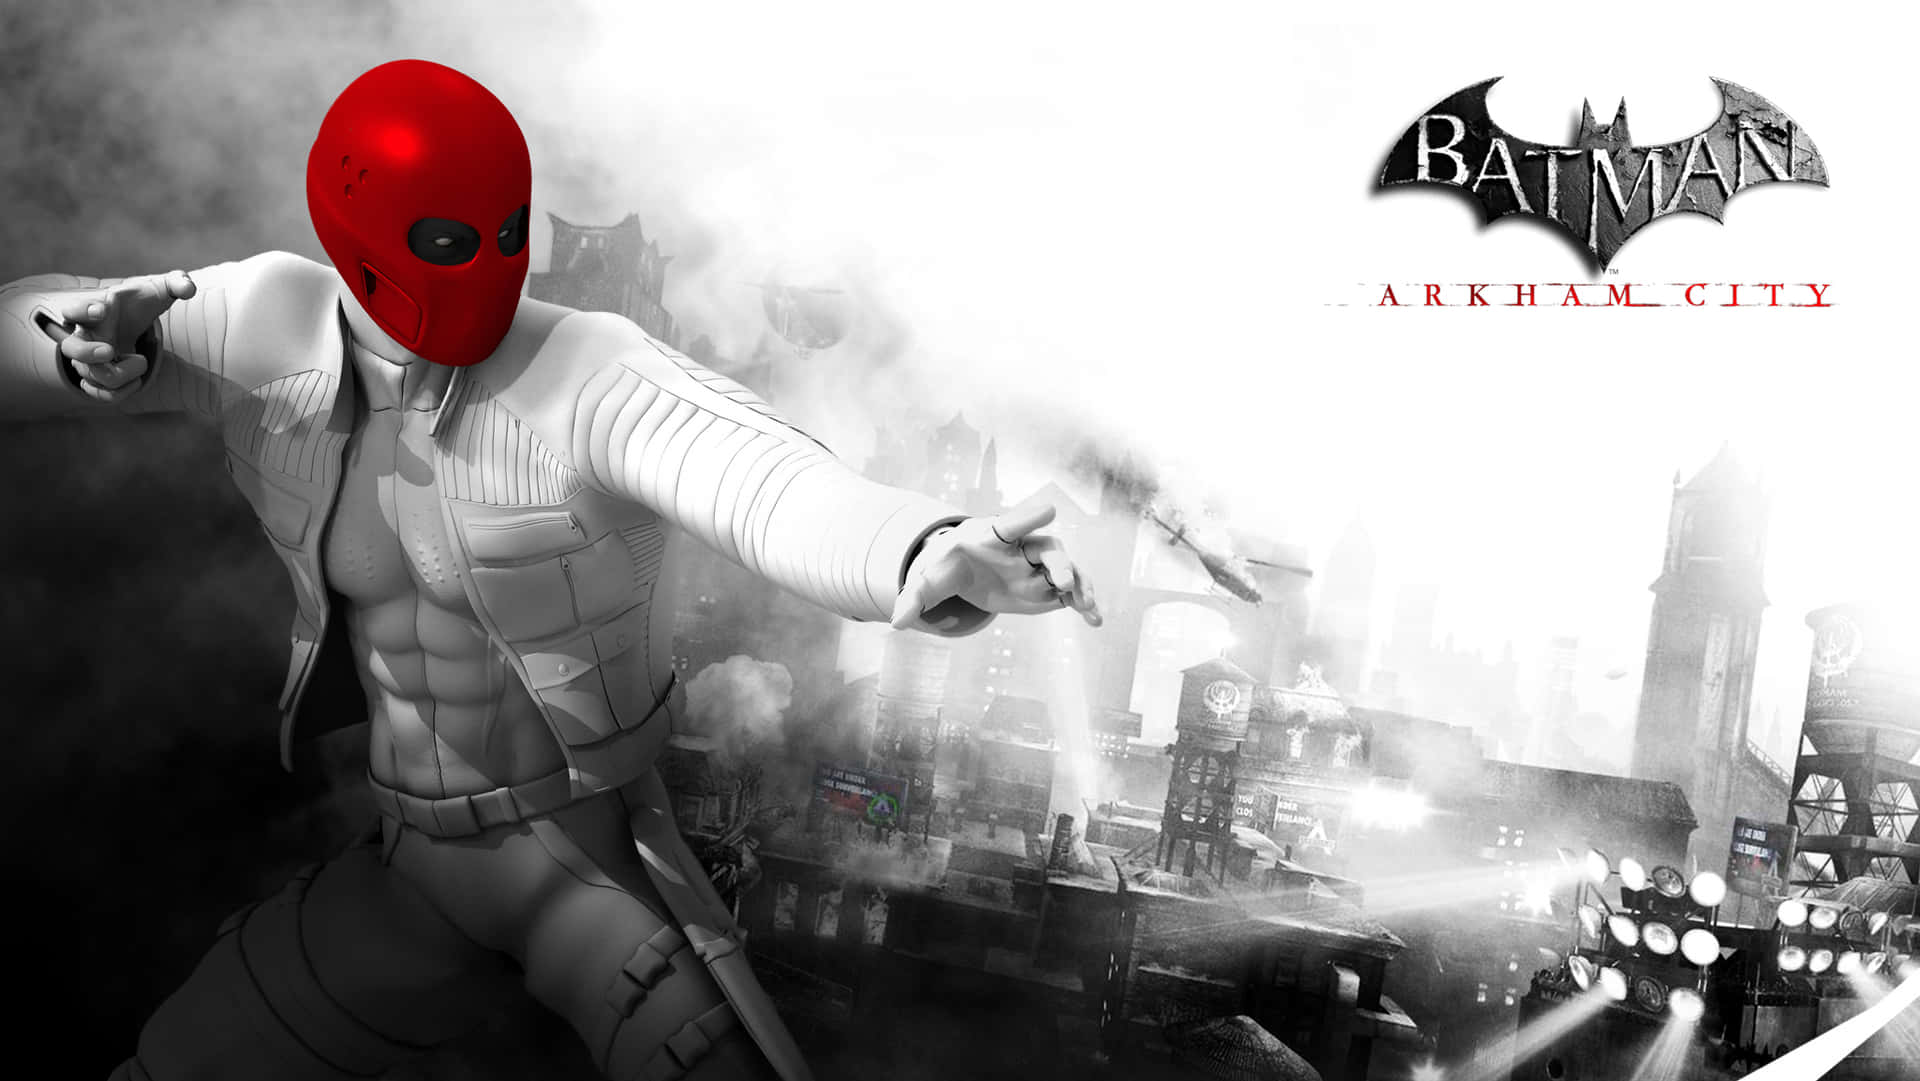 A Man In A Red Mask Is Holding A Gun